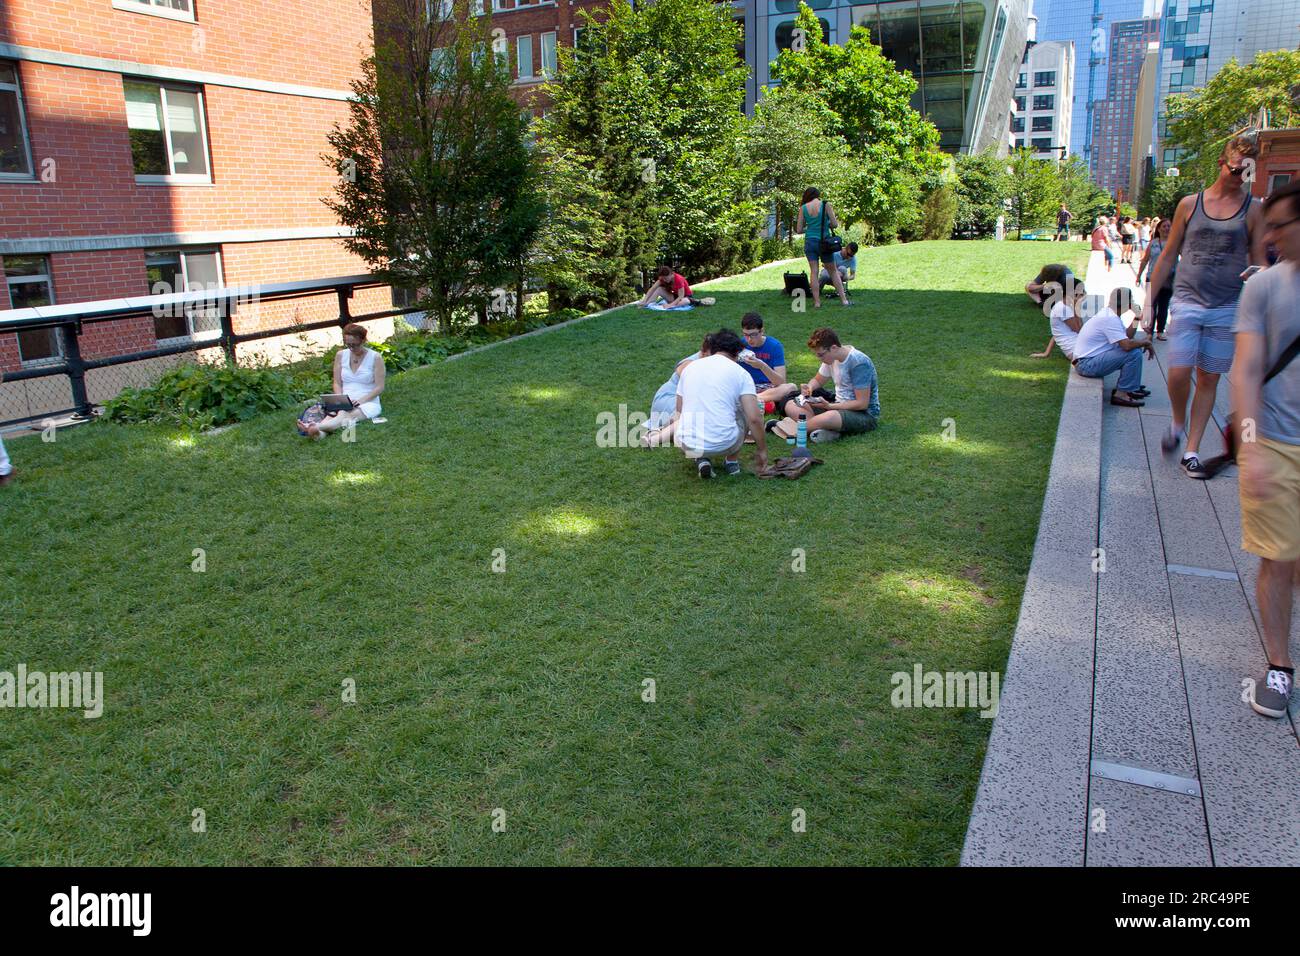 USA, New York State, New York City, Manhattan, The High Line public park on disused elevated railway track in the meat packing district. USA, New York Stock Photo